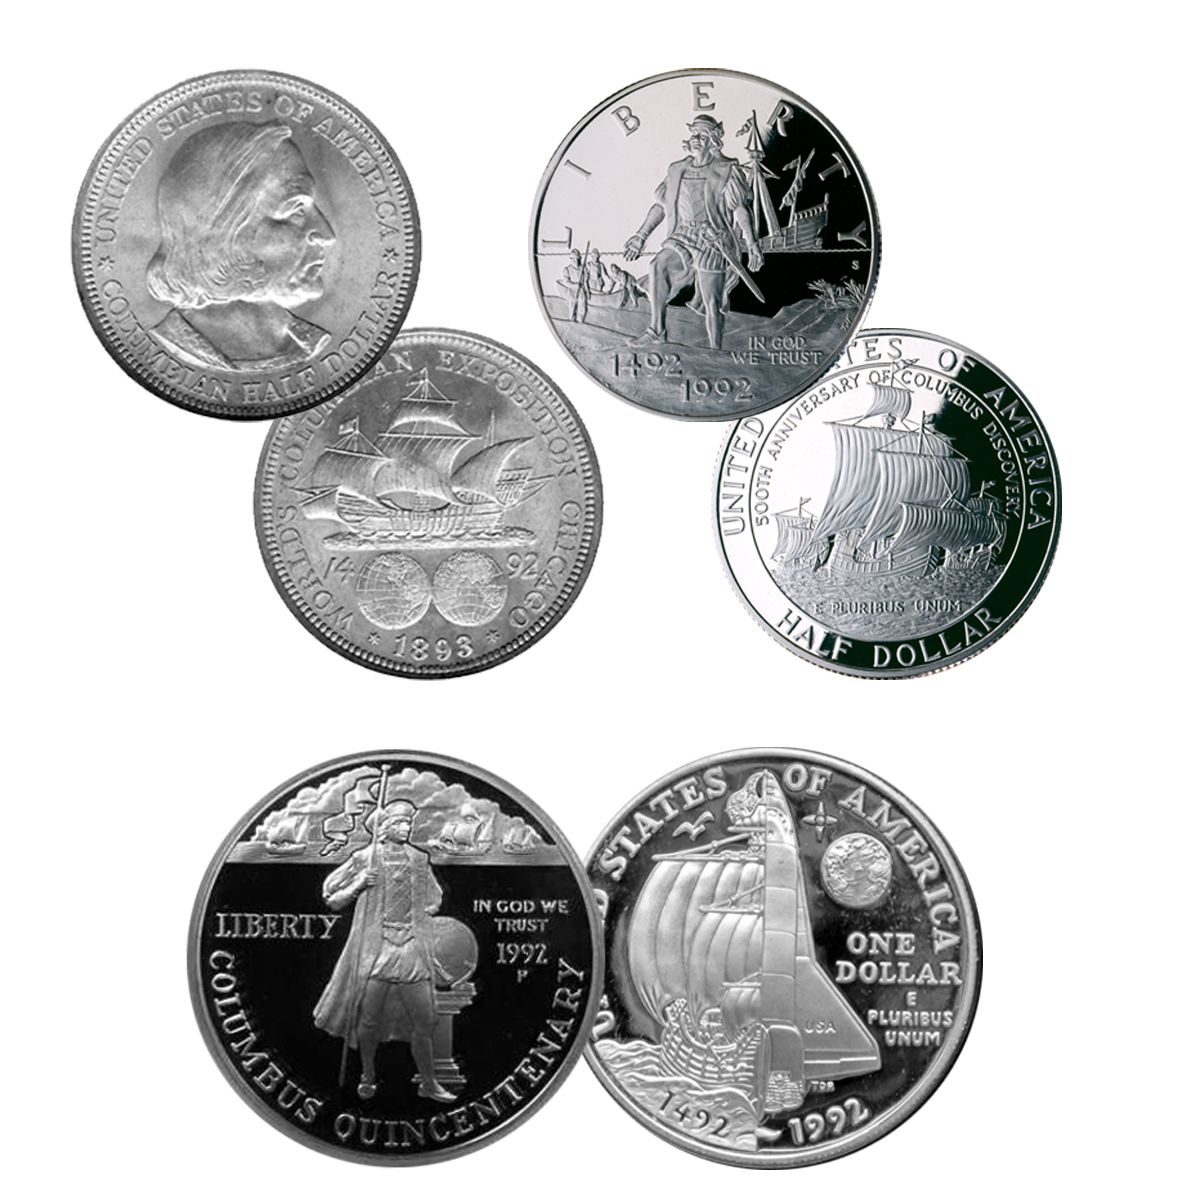 The Columbus Commemorative Coin Collection